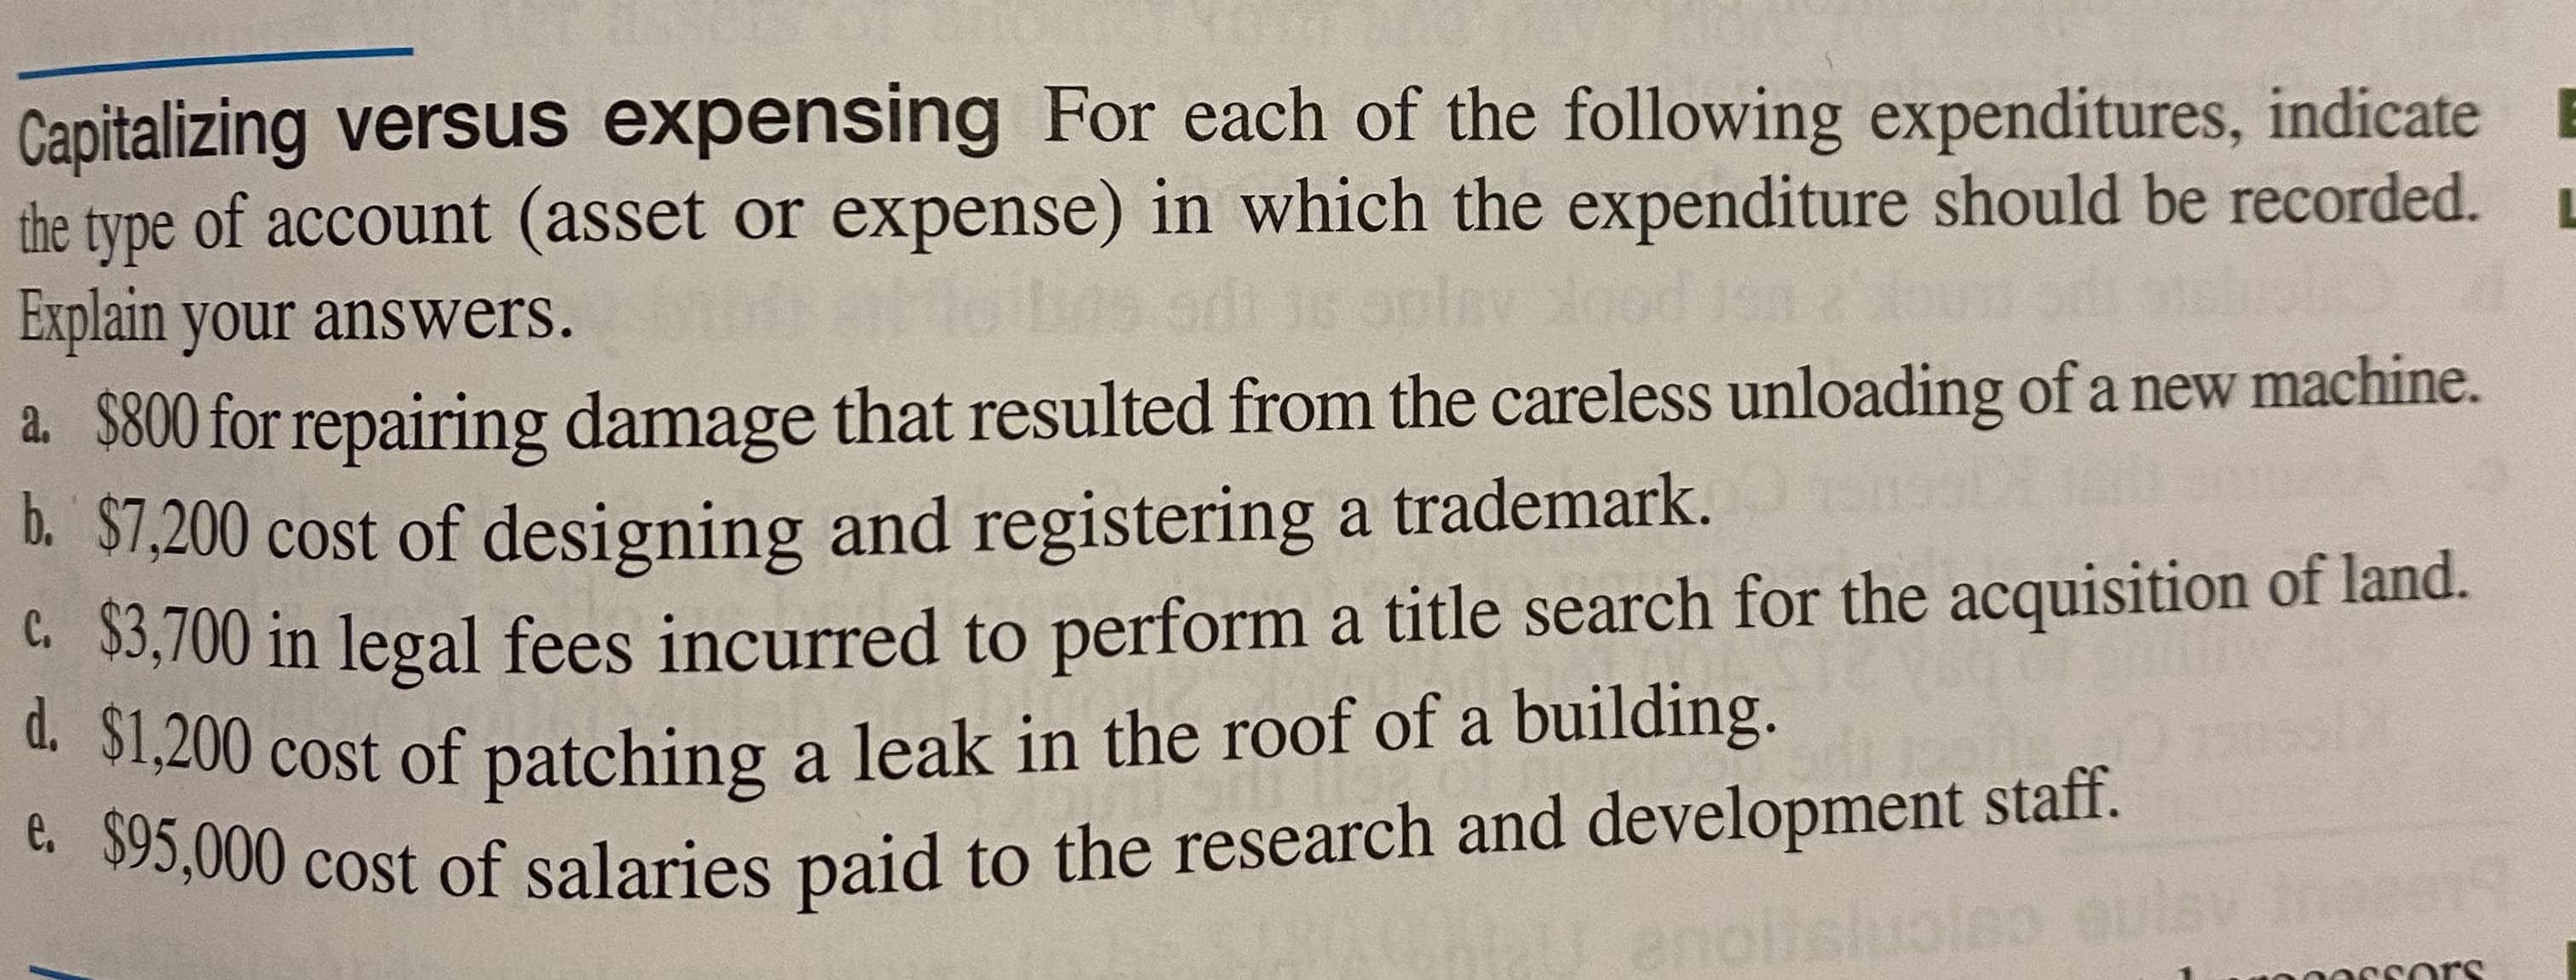 Capitalizing versus expensing For each of the following expenditures, indicat
the type of account (asset or expense) in which the expenditure should be recorded
Explain your answers.
a. $800 for repairing damage that resulted from the careless unloading of a new machine
